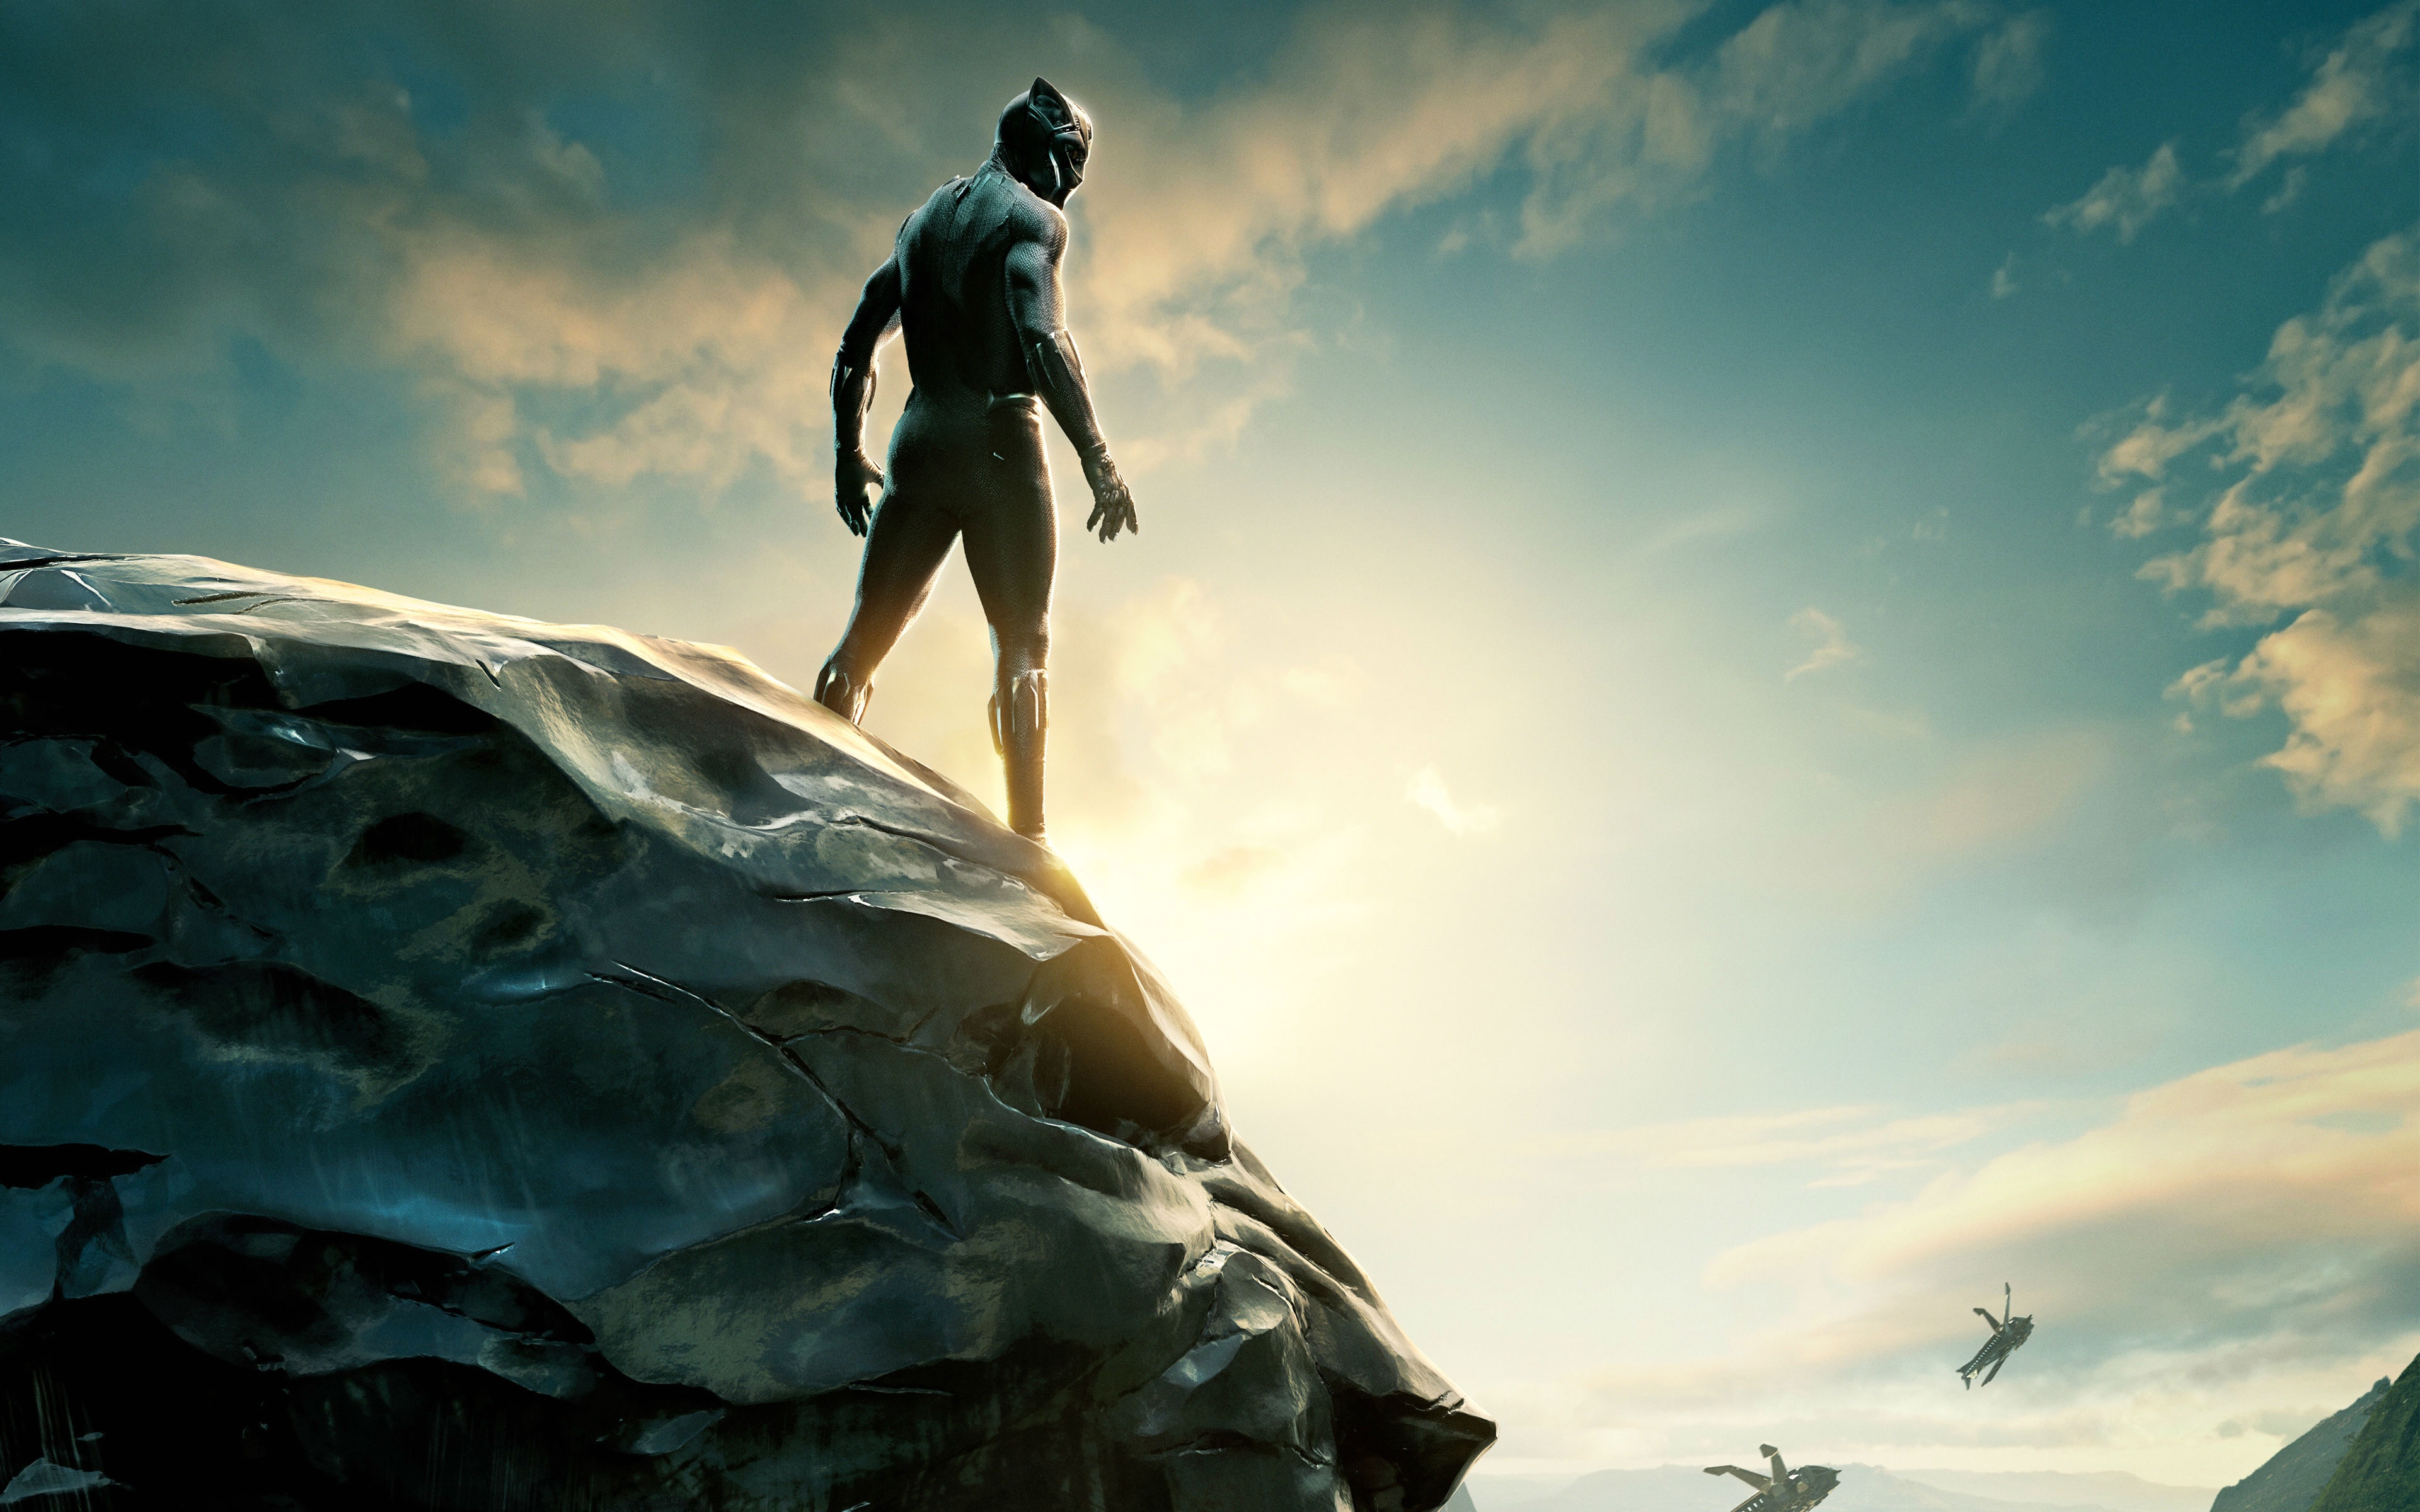 General 3840x2400 Black Panther panthers Avengers: Infinity war Chadwick Boseman superhero science fiction Marvel Super Heroes movies